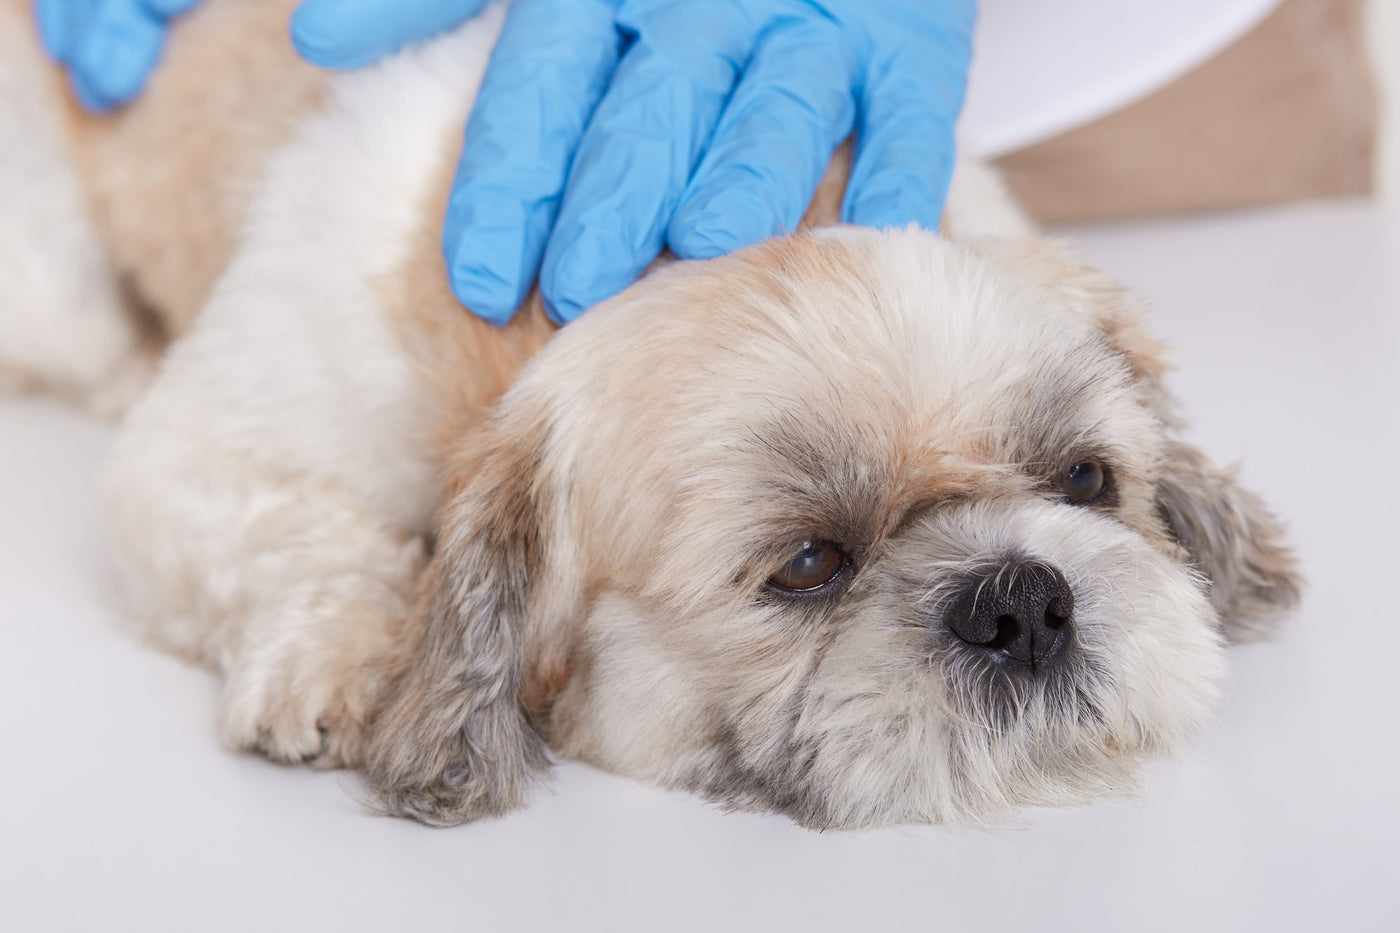 Natural Remedies: A Guide on How to Treat a Bacterial Skin Infection in Dogs Safely and Effectively